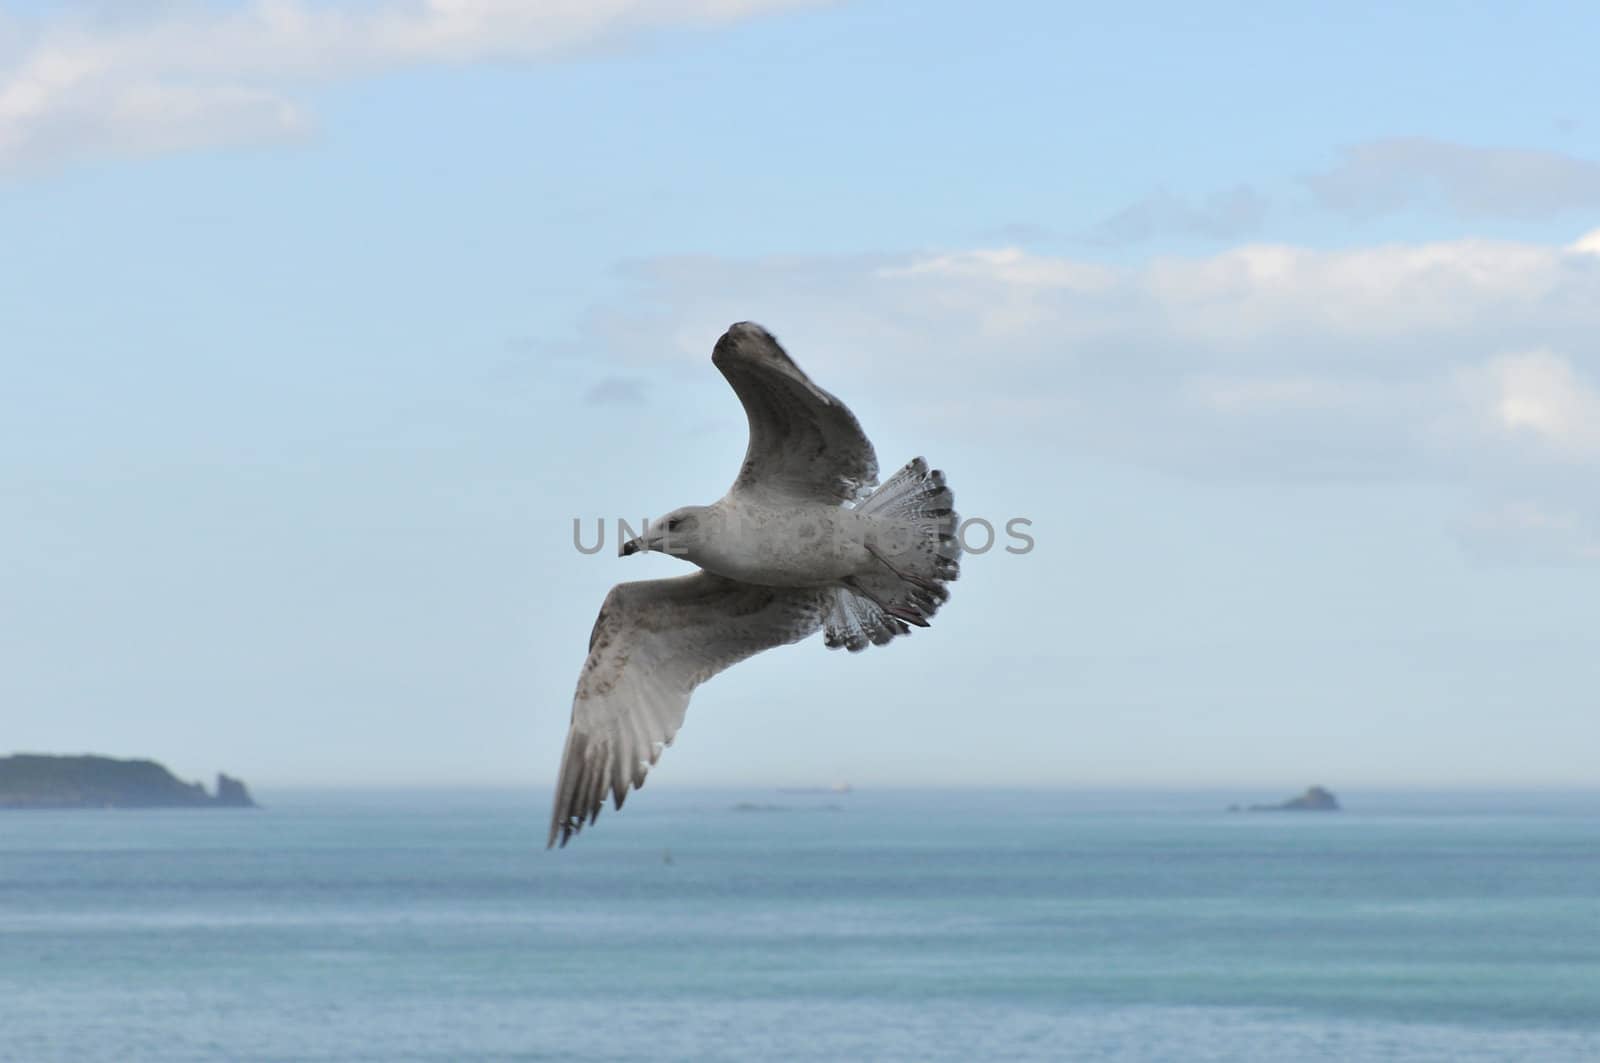 Seagull in flight with the sea and a blue sky